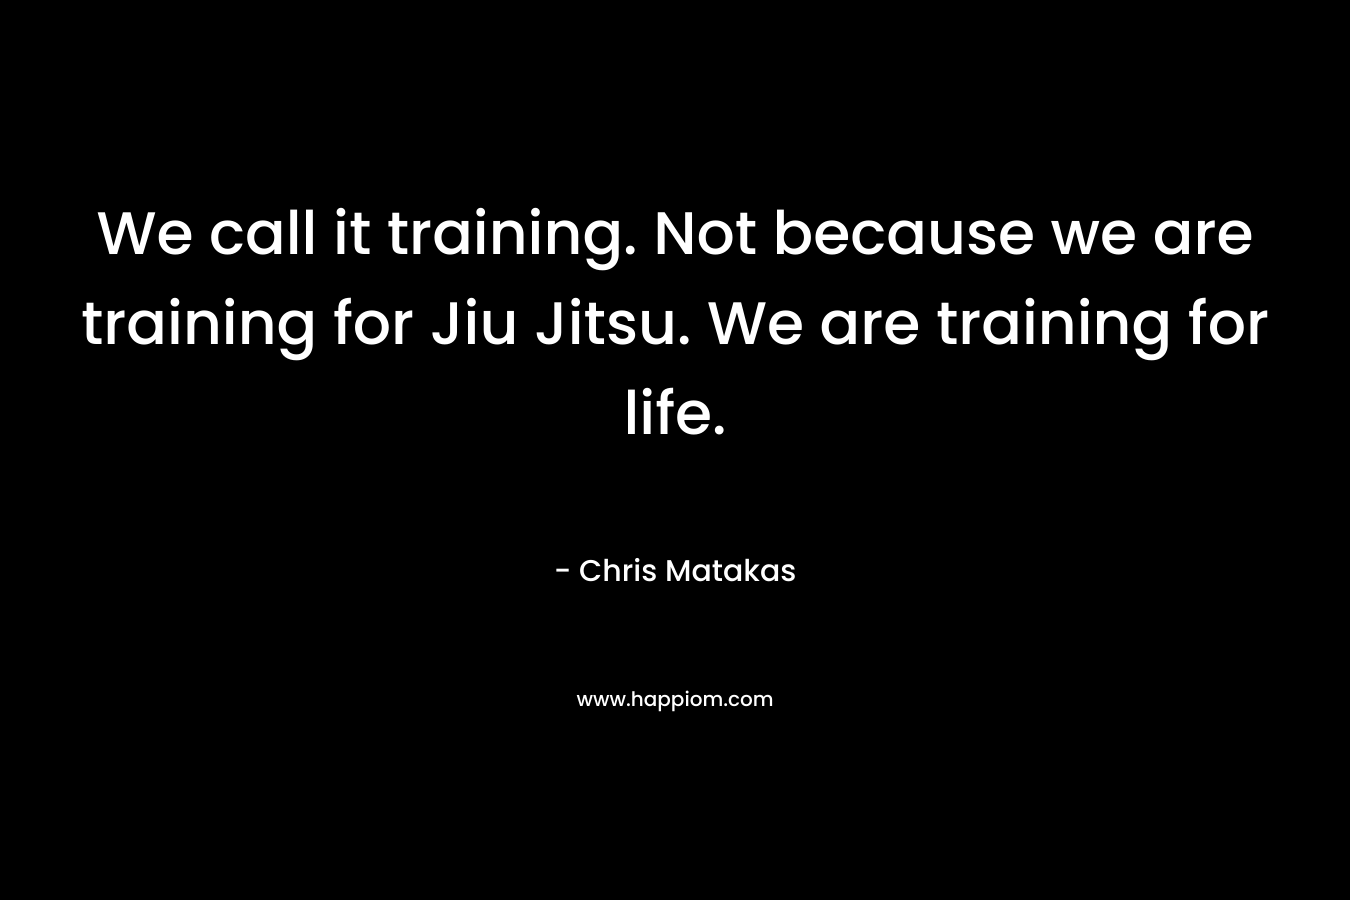 We call it training. Not because we are training for Jiu Jitsu. We are training for life. – Chris Matakas